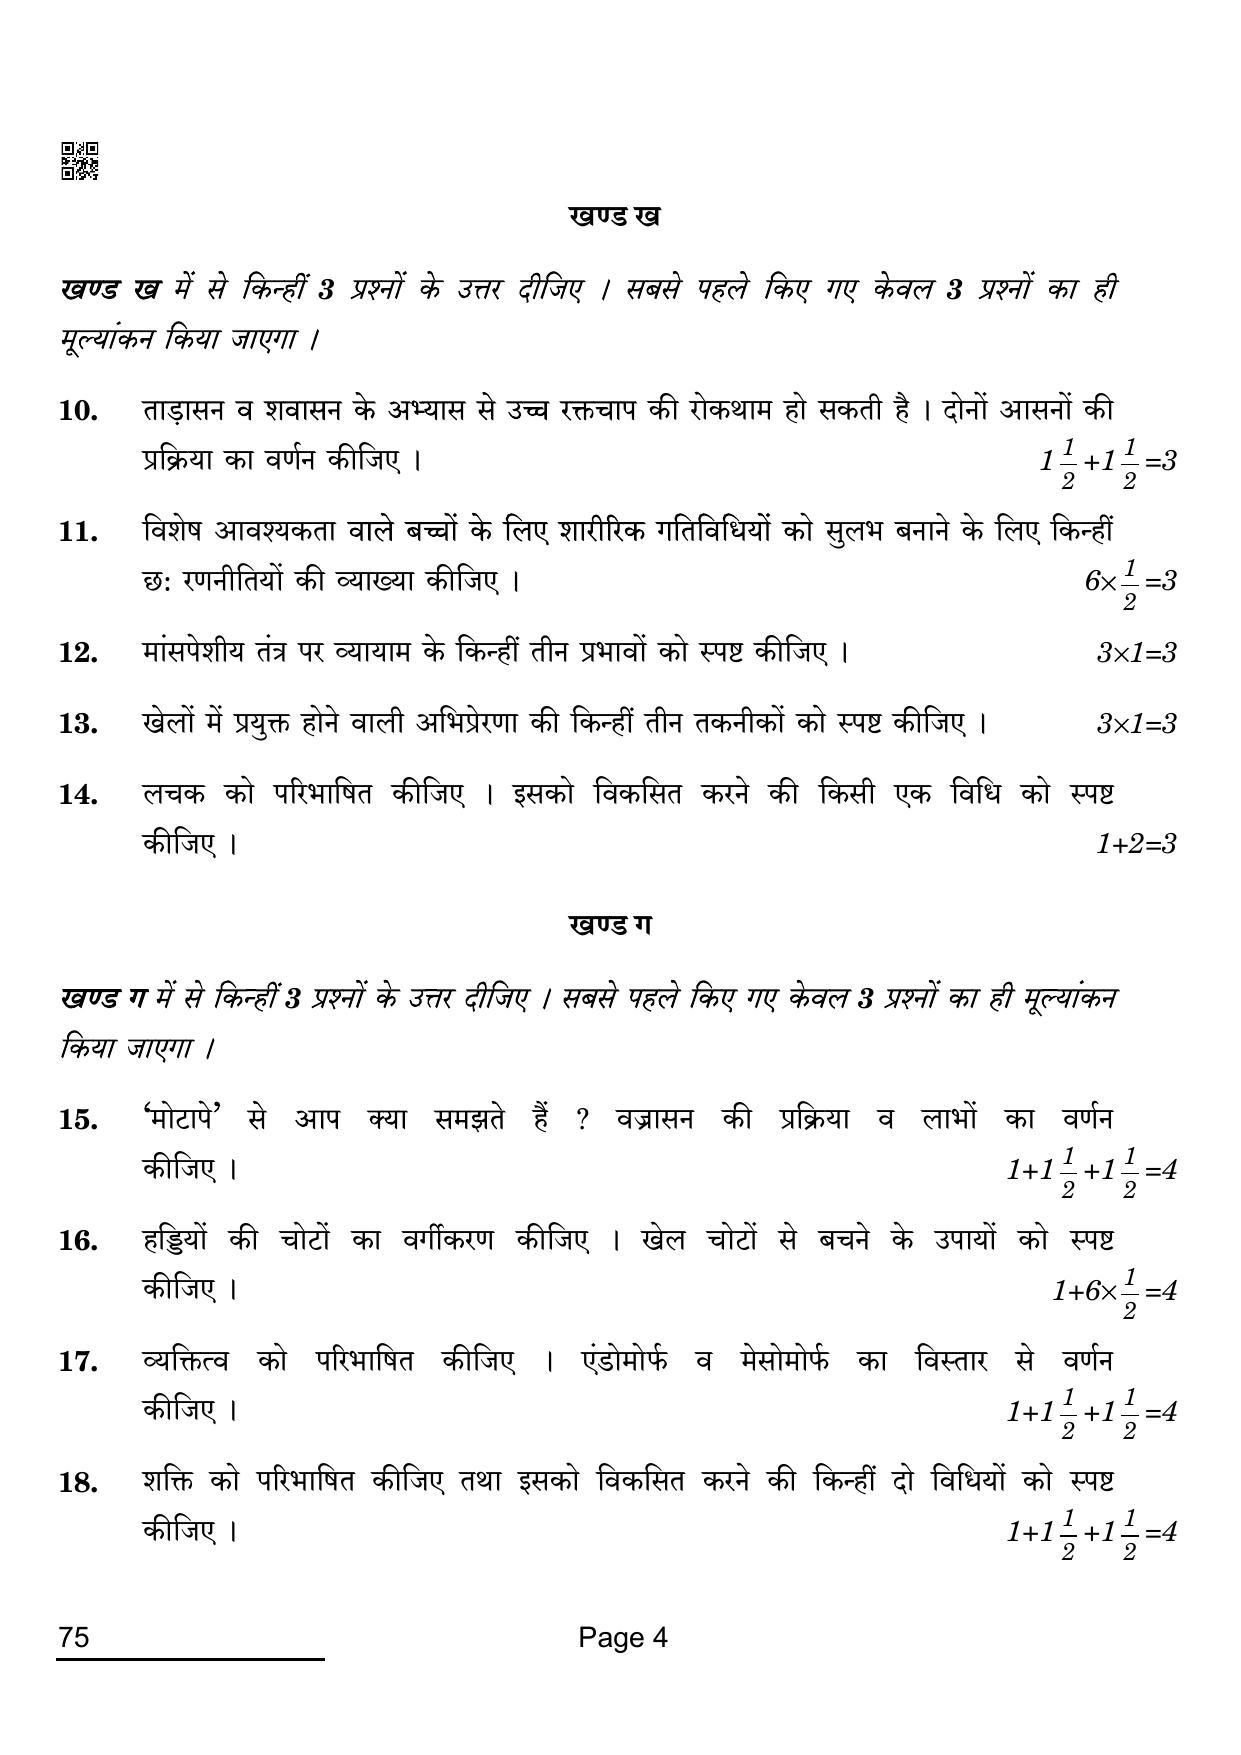 CBSE Class 12 75 PHYSICAL EDUCATION 2022 Compartment Question Paper - Page 4